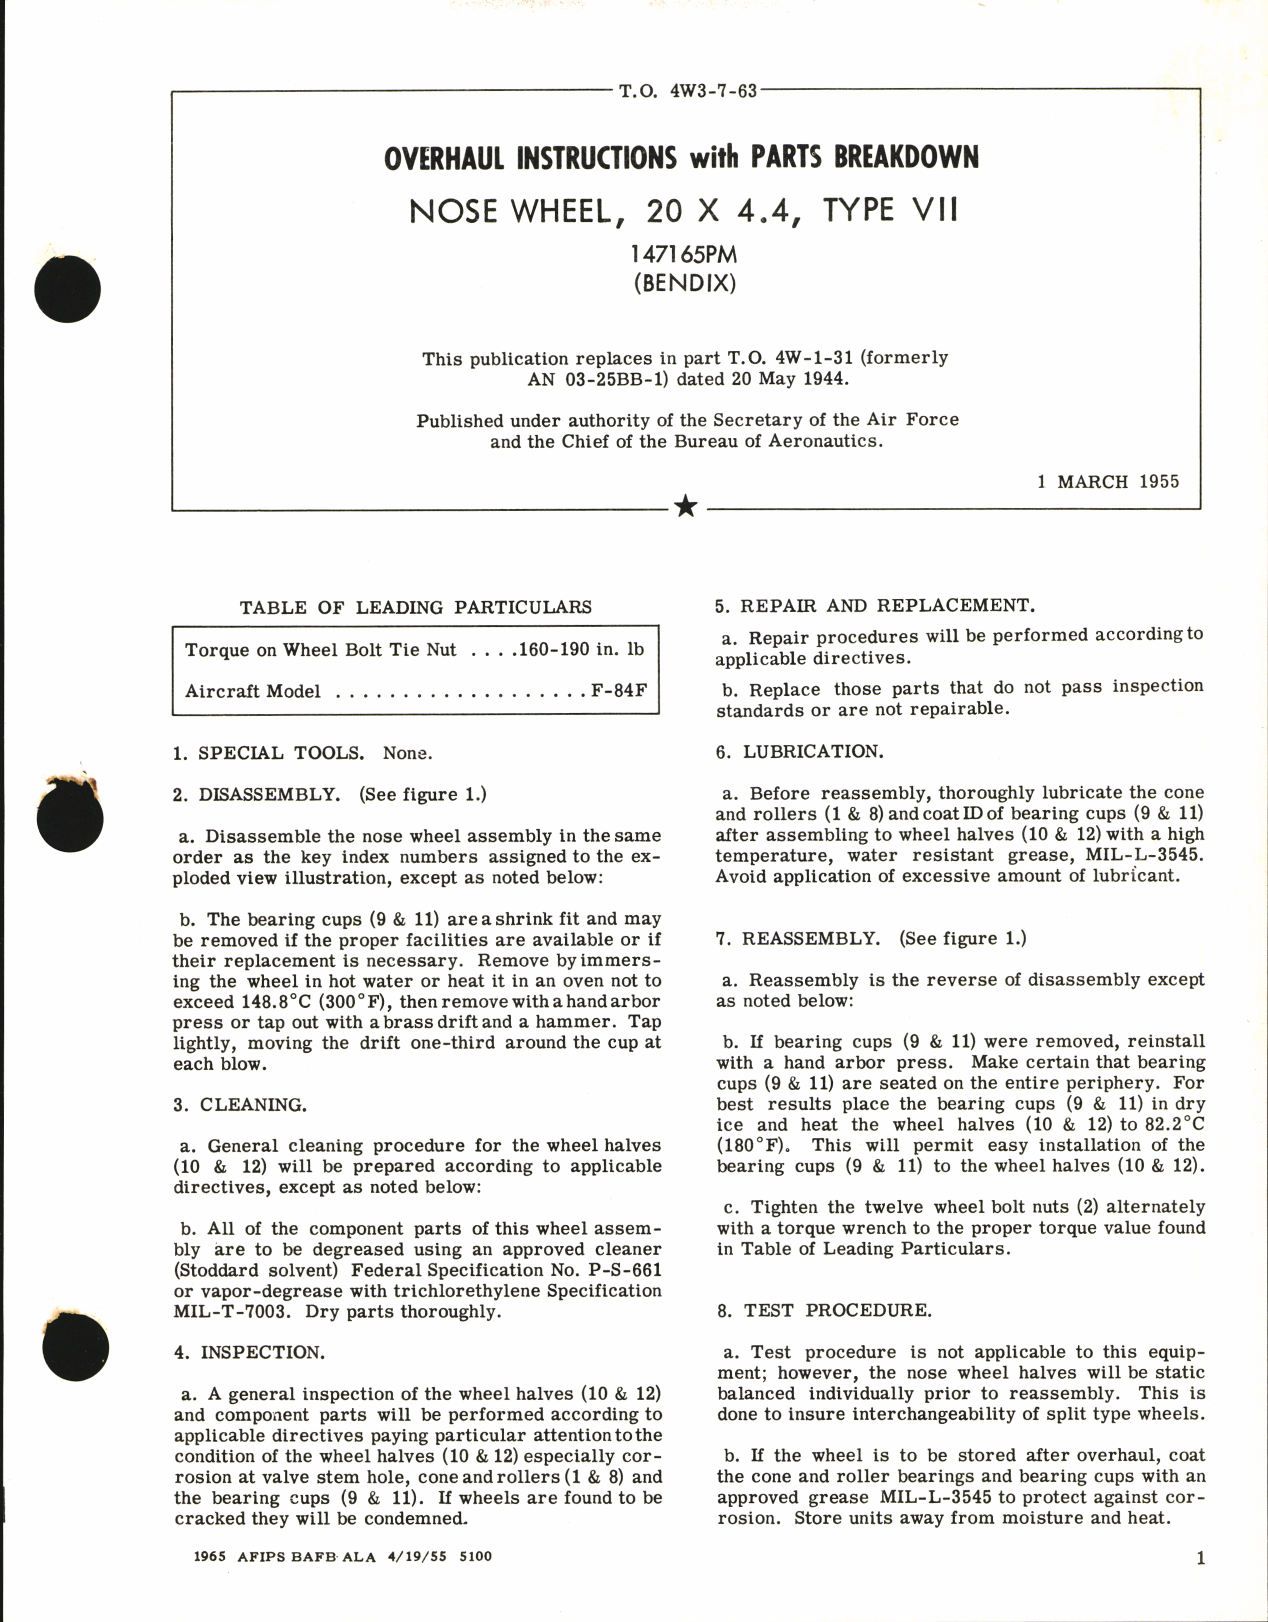 Sample page 1 from AirCorps Library document: Overhaul Instructions with Parts Breakdown for Nose Wheel 20 x 4.4, Type VII